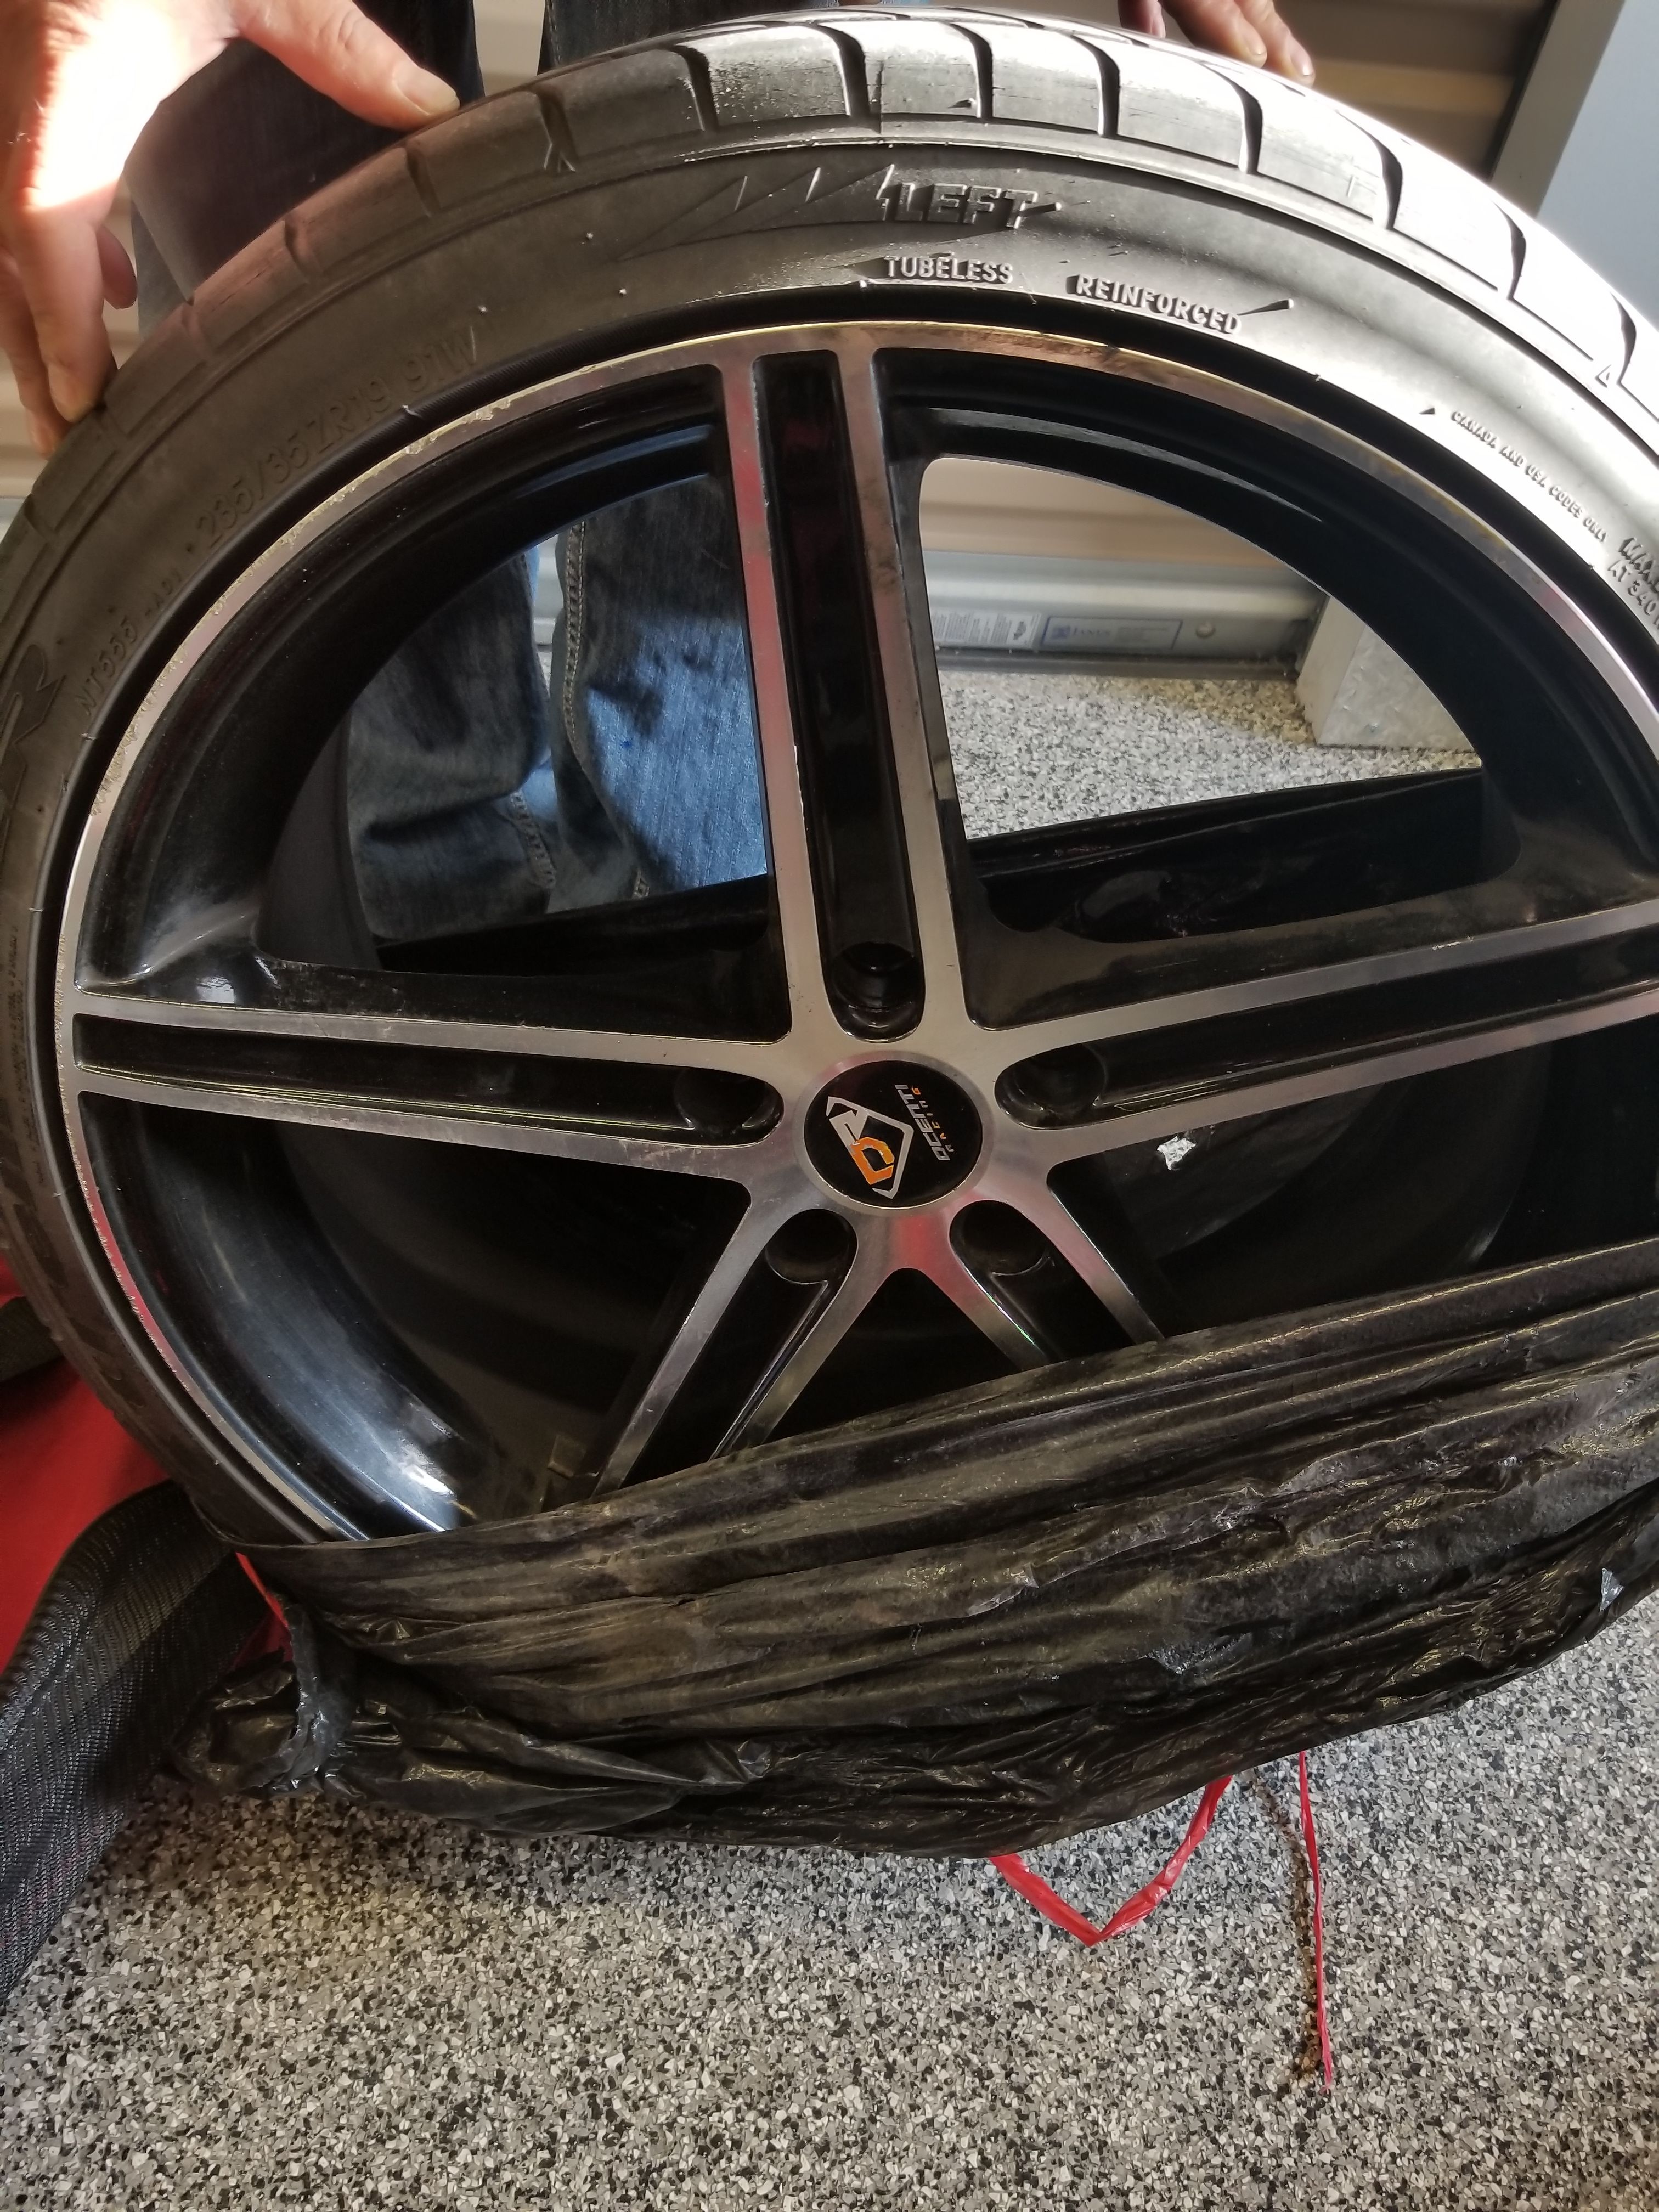 19" Dcenti Racing Rims, continental tires